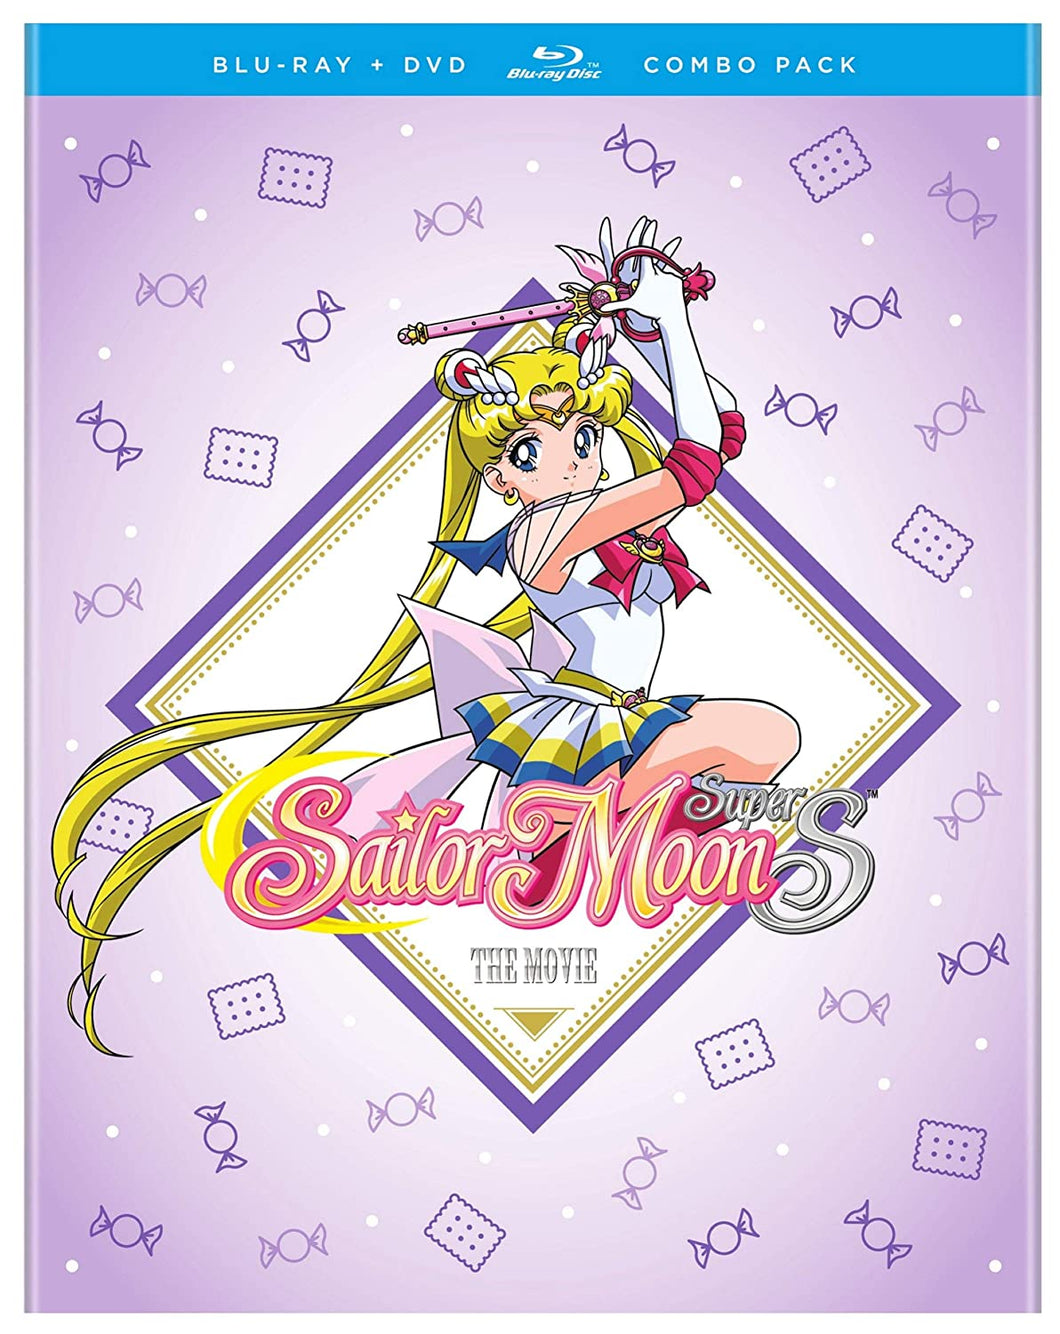 Sailor Moon Super S the Movie Combo Pack Blu-ray DVD